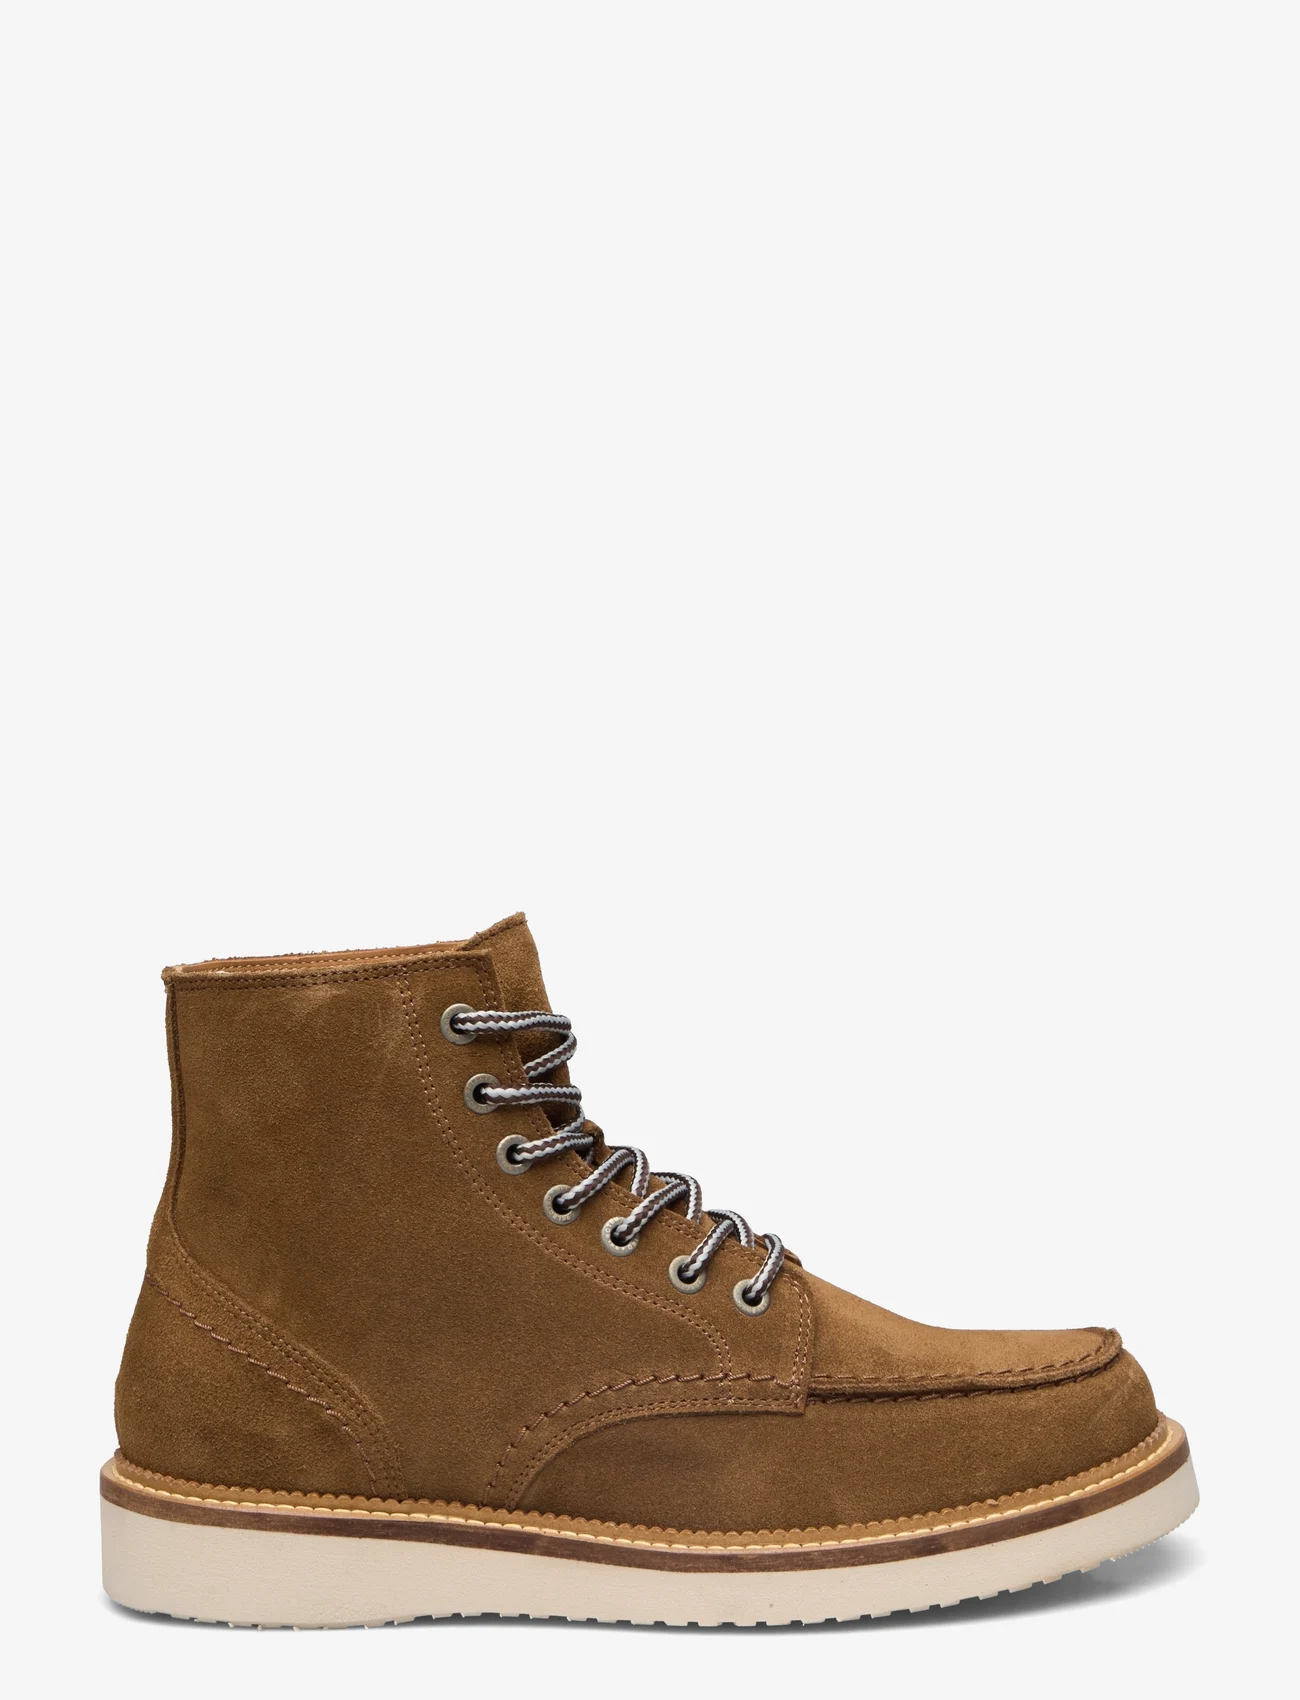 Selected Homme - SLHTEO NEW SUEDE MOC-TOE BOOT B - kängor med snörning - tobacco brown - 1